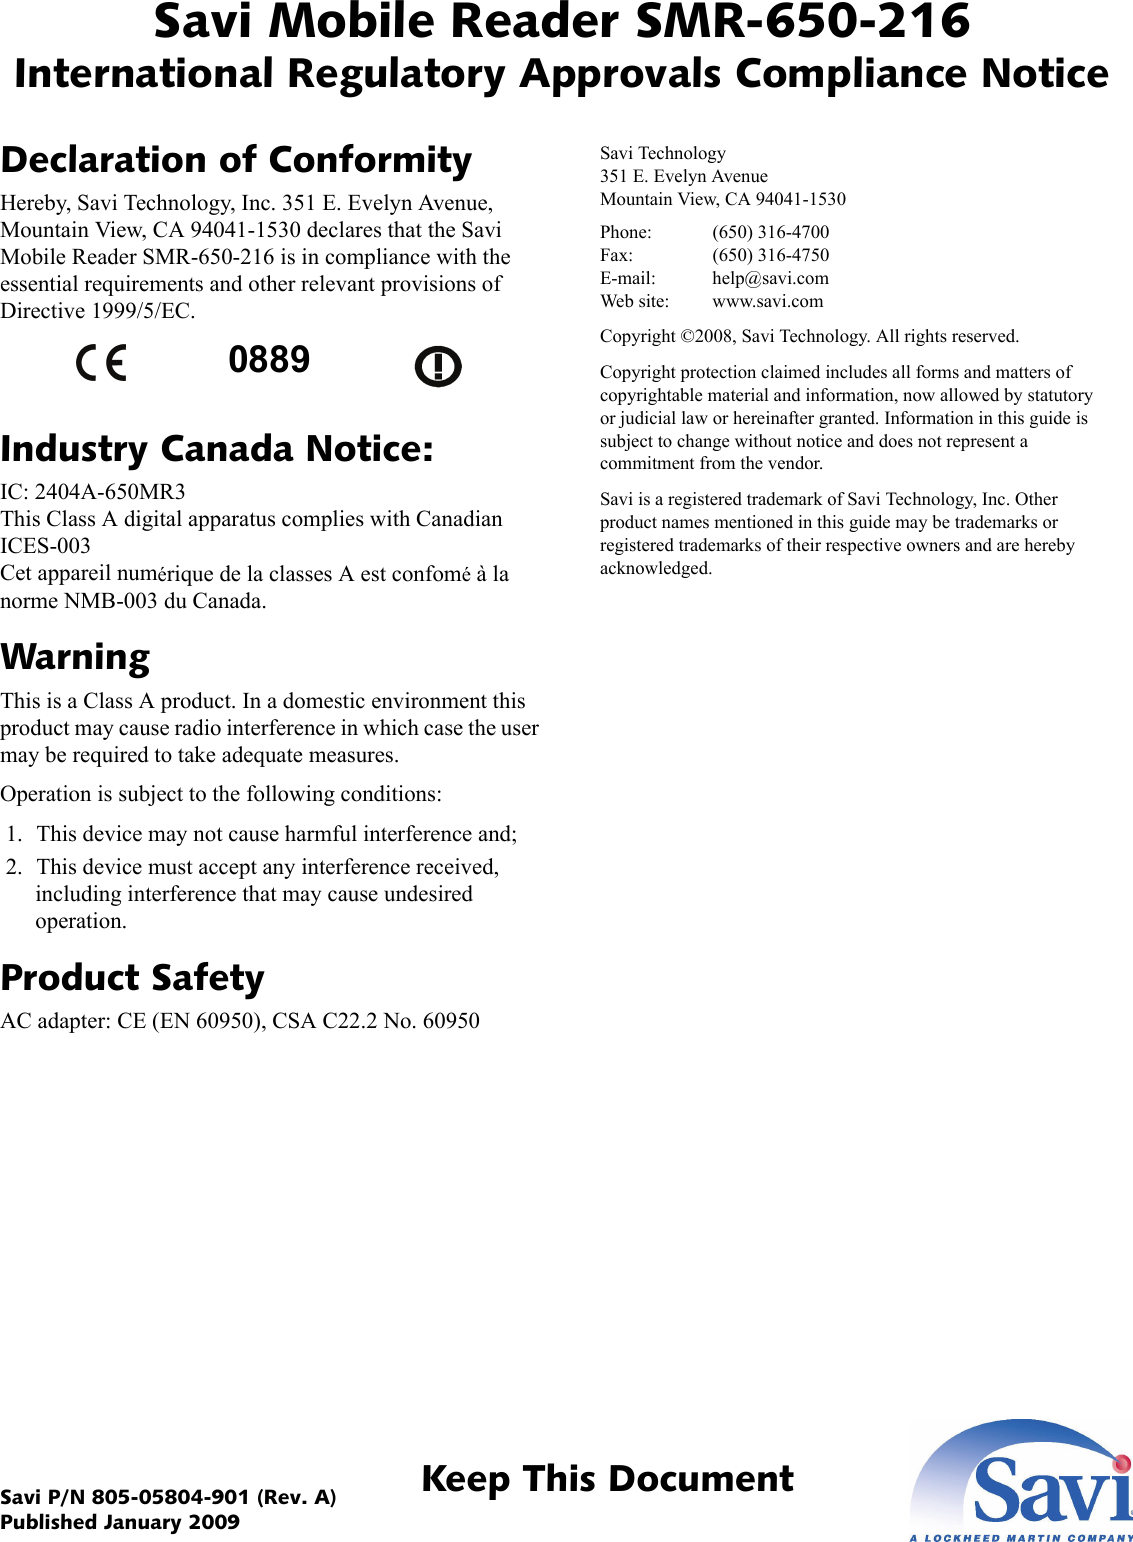 Savi Mobile Reader SMR-650-216International Regulatory Approvals Compliance NoticeKeep This DocumentSavi P/N 805-05804-901 (Rev. A) Published January 2009Declaration of ConformityHereby, Savi Technology, Inc. 351 E. Evelyn Avenue, Mountain View, CA 94041-1530 declares that the Savi Mobile Reader SMR-650-216 is in compliance with the essential requirements and other relevant provisions of Directive 1999/5/EC. Industry Canada Notice:IC: 2404A-650MR3 This Class A digital apparatus complies with Canadian ICES-003 Cet appareil numérique de la classes A est confomé à la norme NMB-003 du Canada.WarningThis is a Class A product. In a domestic environment this product may cause radio interference in which case the user may be required to take adequate measures.Operation is subject to the following conditions: 1. This device may not cause harmful interference and; 2. This device must accept any interference received, including interference that may cause undesired operation.Product SafetyAC adapter: CE (EN 60950), CSA C22.2 No. 60950Savi Technology 351 E. Evelyn Avenue Mountain View, CA 94041-1530Phone: (650) 316-4700 Fax: (650) 316-4750 E-mail: help@savi.com Web site: www.savi.comCopyright ©2008, Savi Technology. All rights reserved.Copyright protection claimed includes all forms and matters of copyrightable material and information, now allowed by statutory or judicial law or hereinafter granted. Information in this guide is subject to change without notice and does not represent a commitment from the vendor.Savi is a registered trademark of Savi Technology, Inc. Other product names mentioned in this guide may be trademarks or registered trademarks of their respective owners and are hereby acknowledged.0889